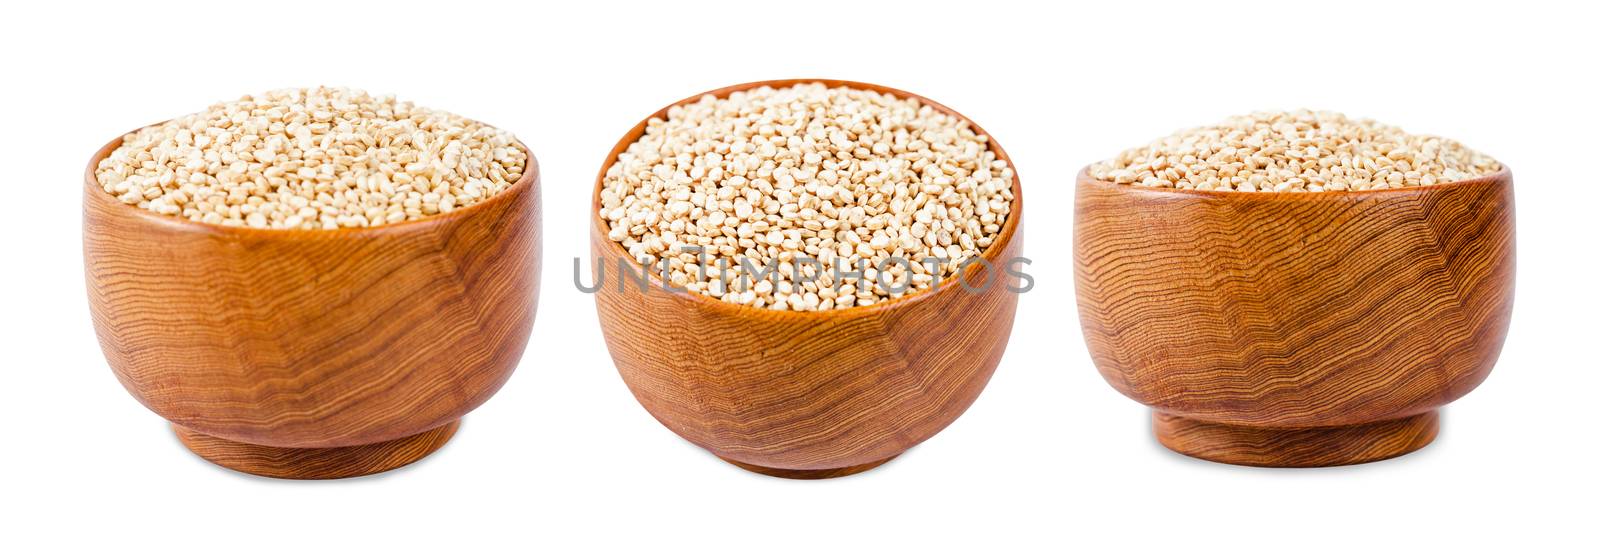 Raw quinoa seeds in wooden bowl. by Gamjai